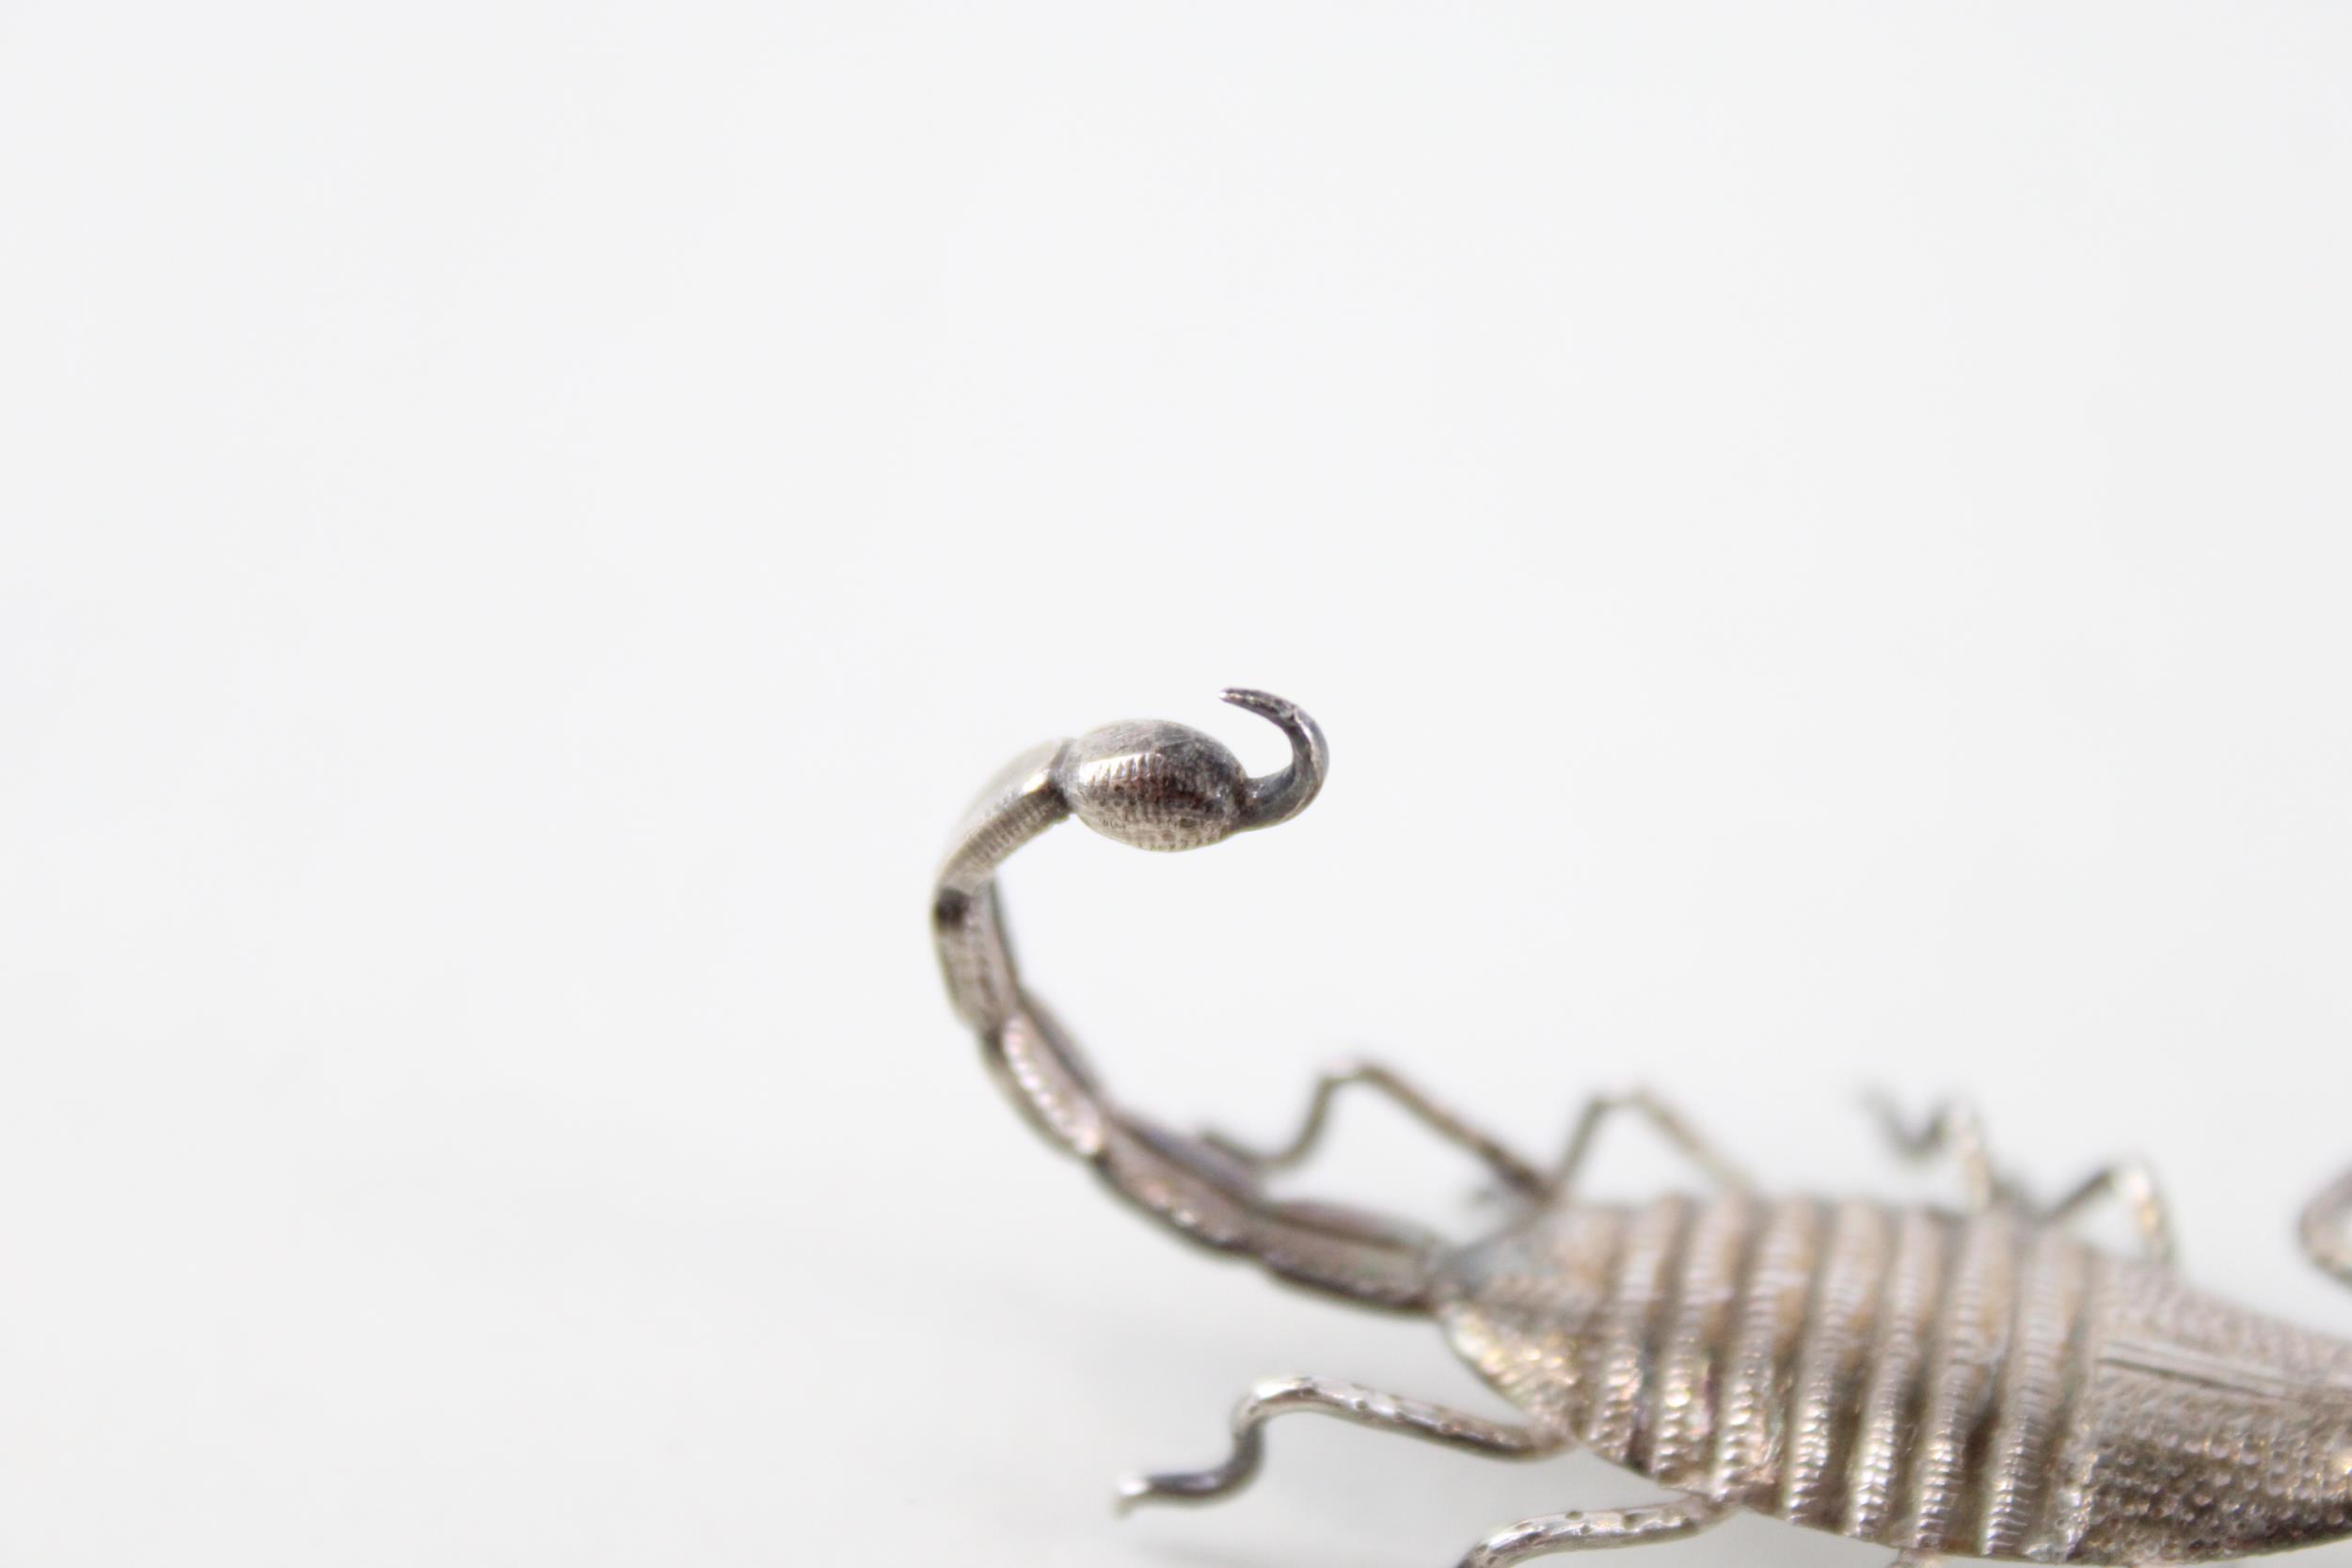 Antique / Vintage .950 SILVER Scorpion Hair Accessory / Figurine (6g) // Length - 5.2cm XRF TESTED - Image 3 of 5